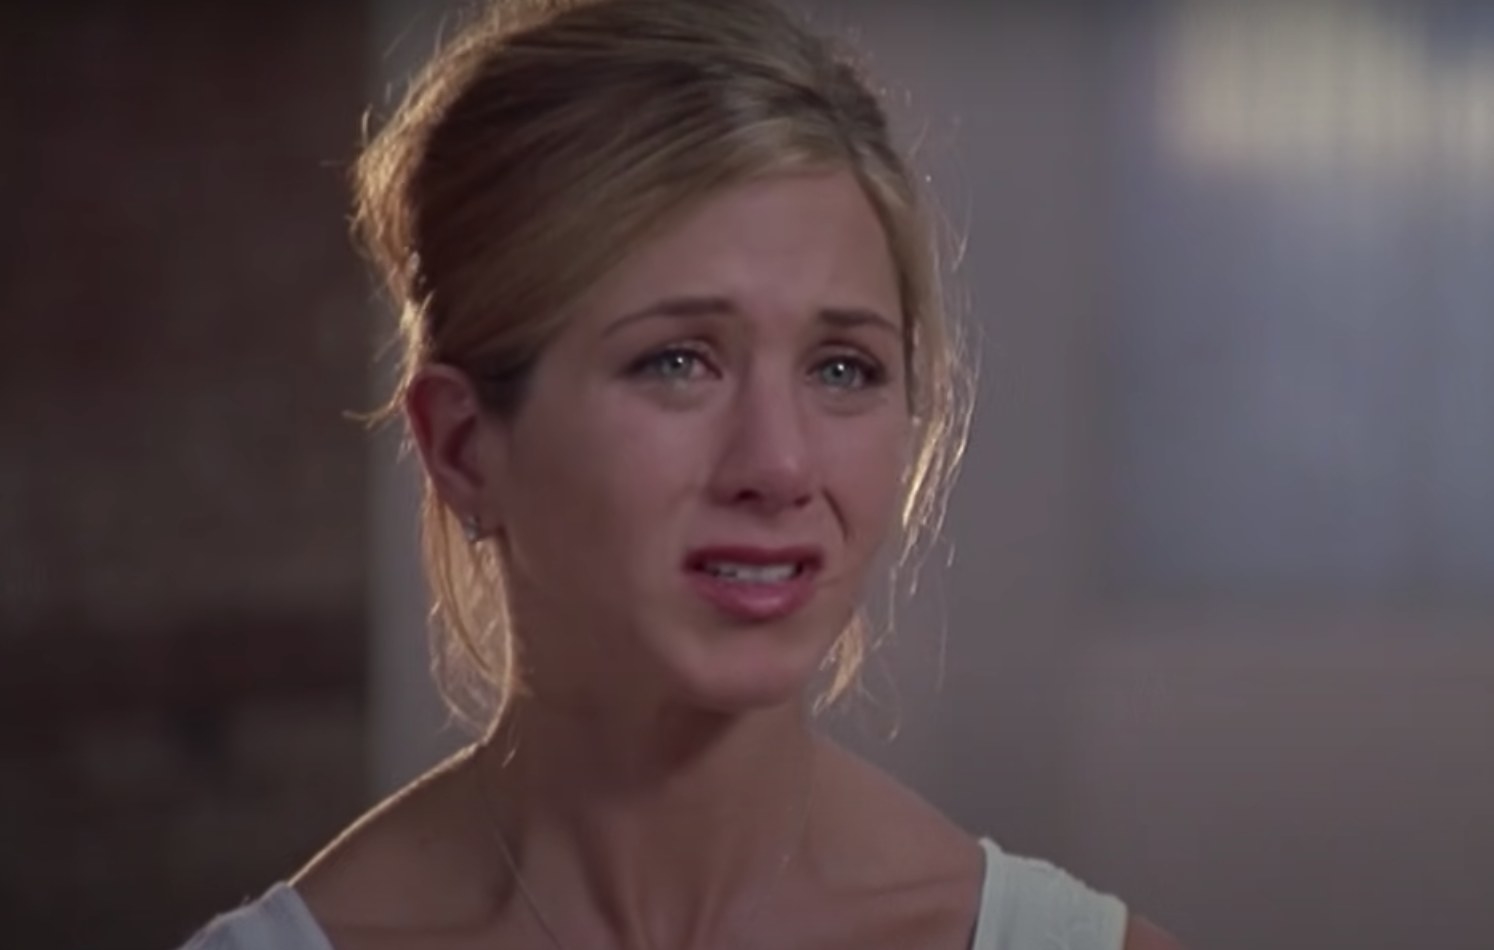 Jennifer Aniston has her hair in a bun and tears in her eyes while grimacing.